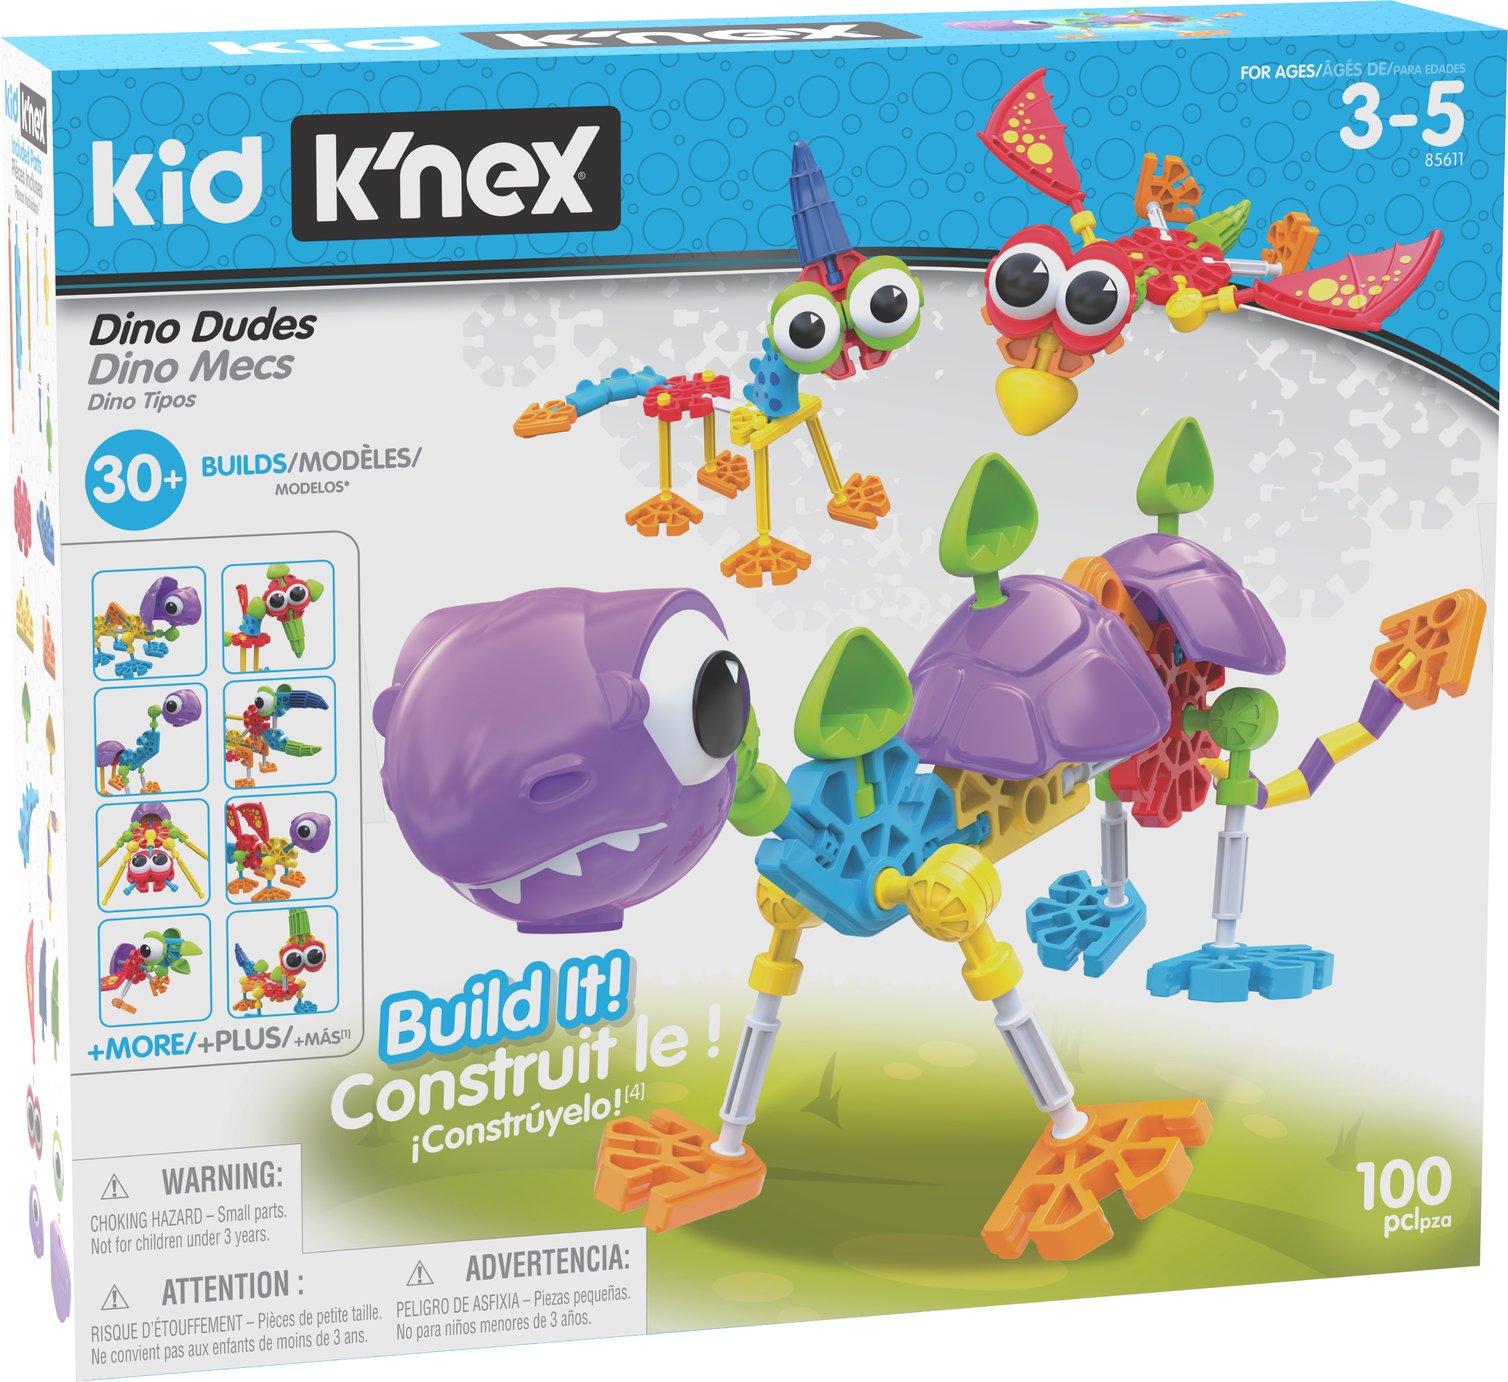 knex for 5 year olds